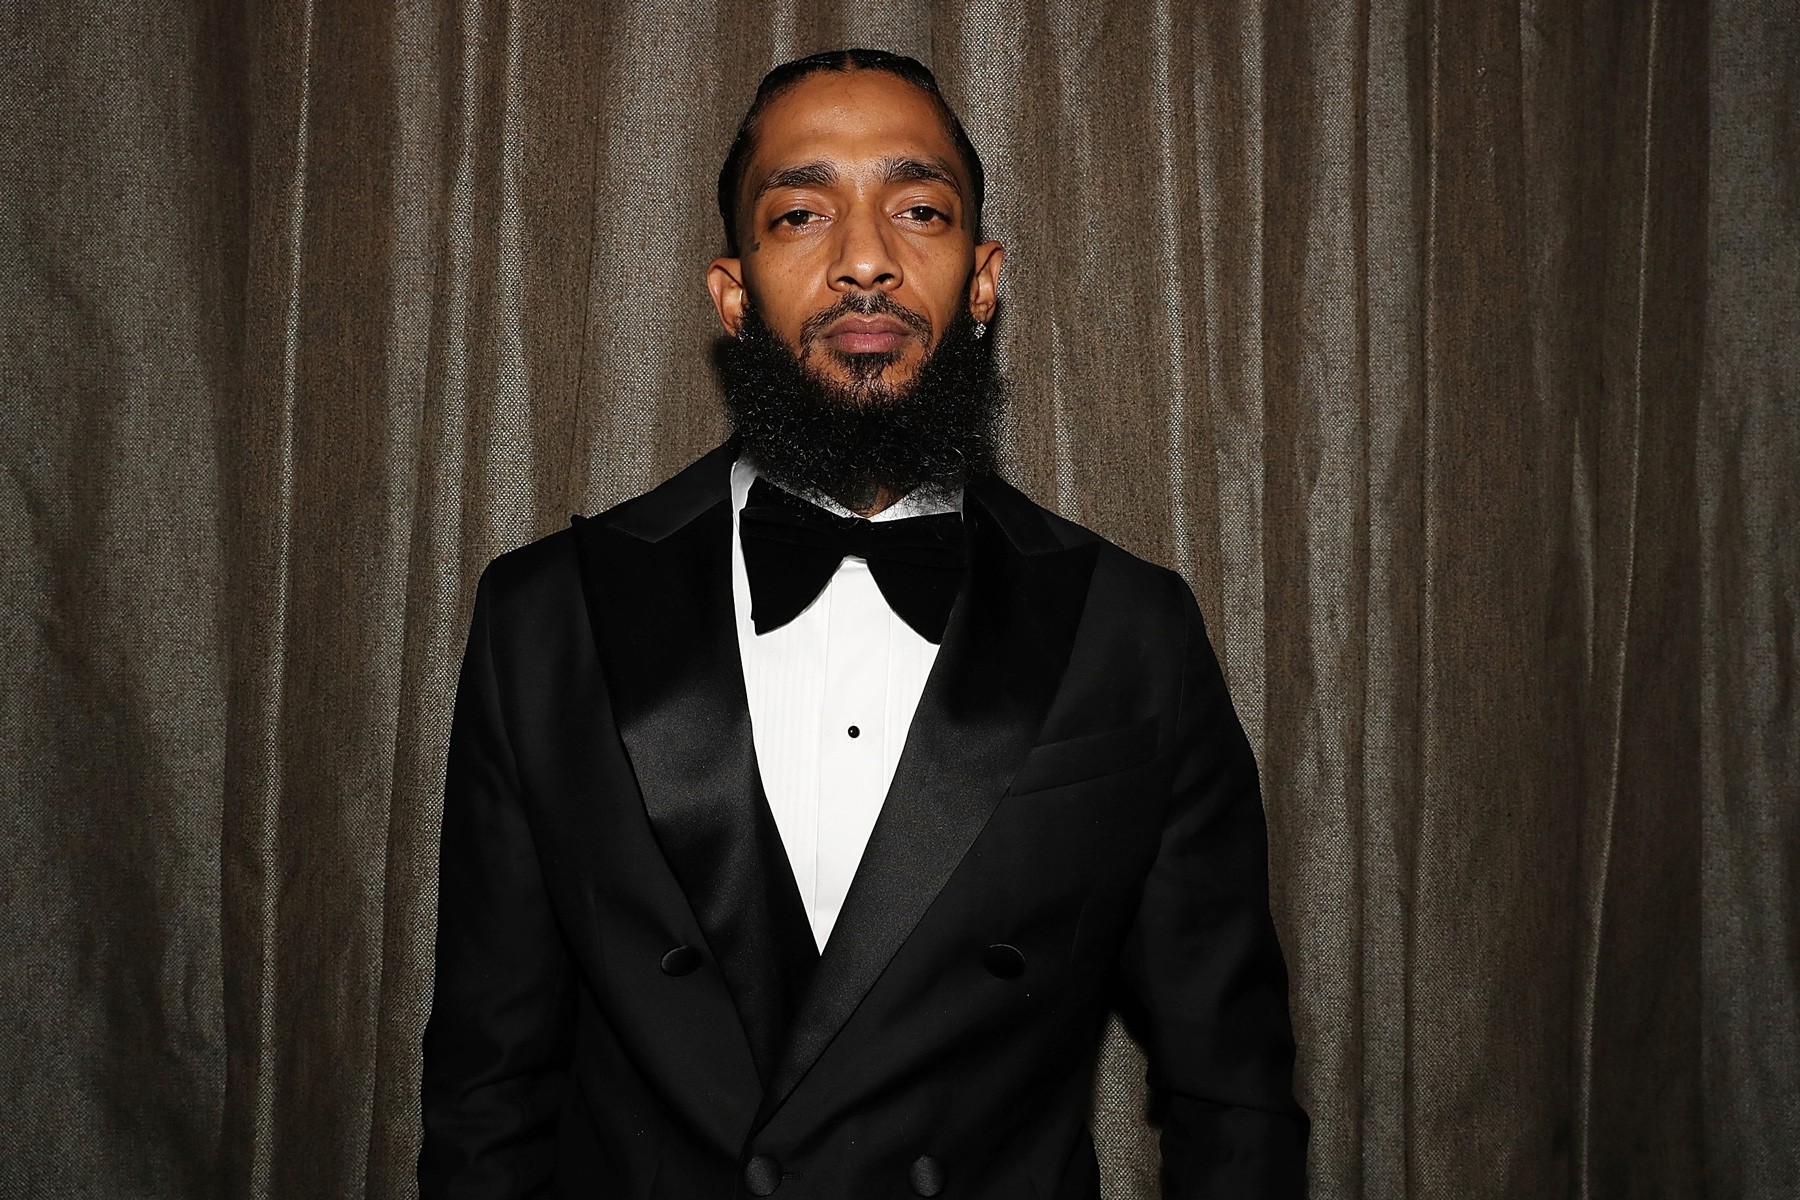 Nipsey Hussle was Secretly Investigated by LAPD for Gang Activity